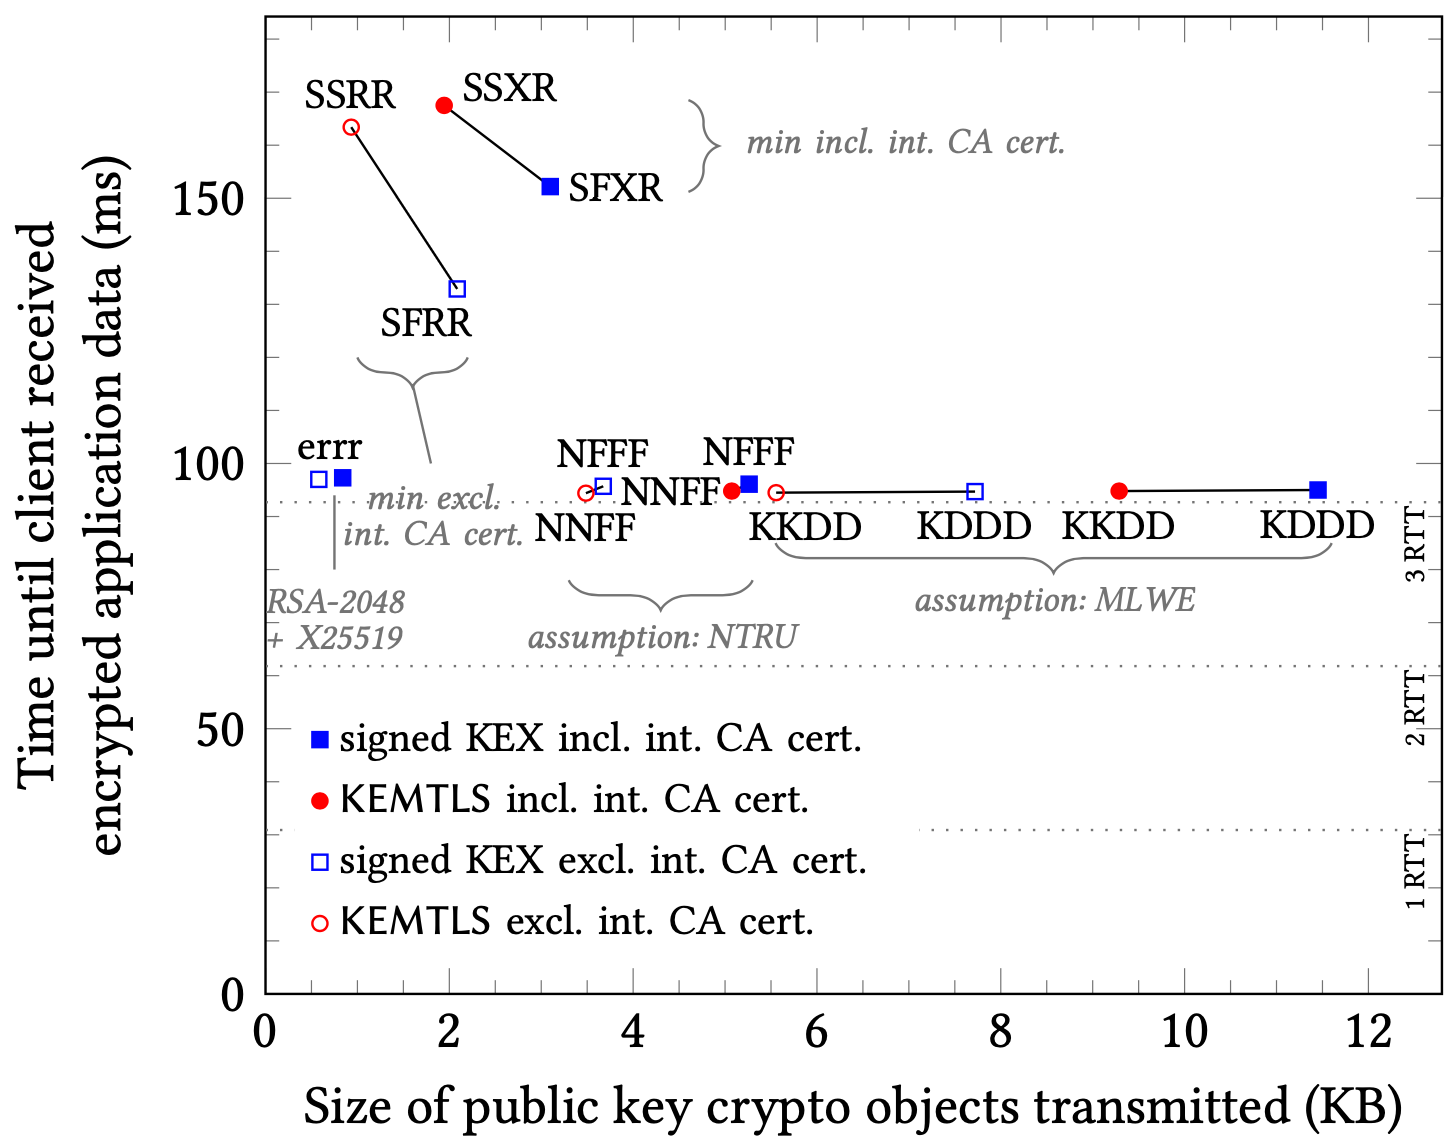 Handshake size versus handshake establishment time, for signed KEX and KEMTLS ciphersuites, including and excluding transmission/processing of one intermediate CA certificate. Latency 30.9 ms, bandwidth 1000 Mbps, 0% packet loss. Label syntax: ABCD: A = ephemeral key exchange, B = leaf certificate, C = intermediate CA certificate, D = root certificate. Label values: <u>D</u>ilithium, <u>e</u>CDH X25519, <u>F</u>alcon, <u>K</u>yber, <u>N</u>TRU, <u>R</u>ainbow, <u>r</u>SA-2048, <u>S</u>IKE, <u>X</u>MSS<sup>MT</sup><sub>s</sub>; all level-1 schemes (NIST Round 3).